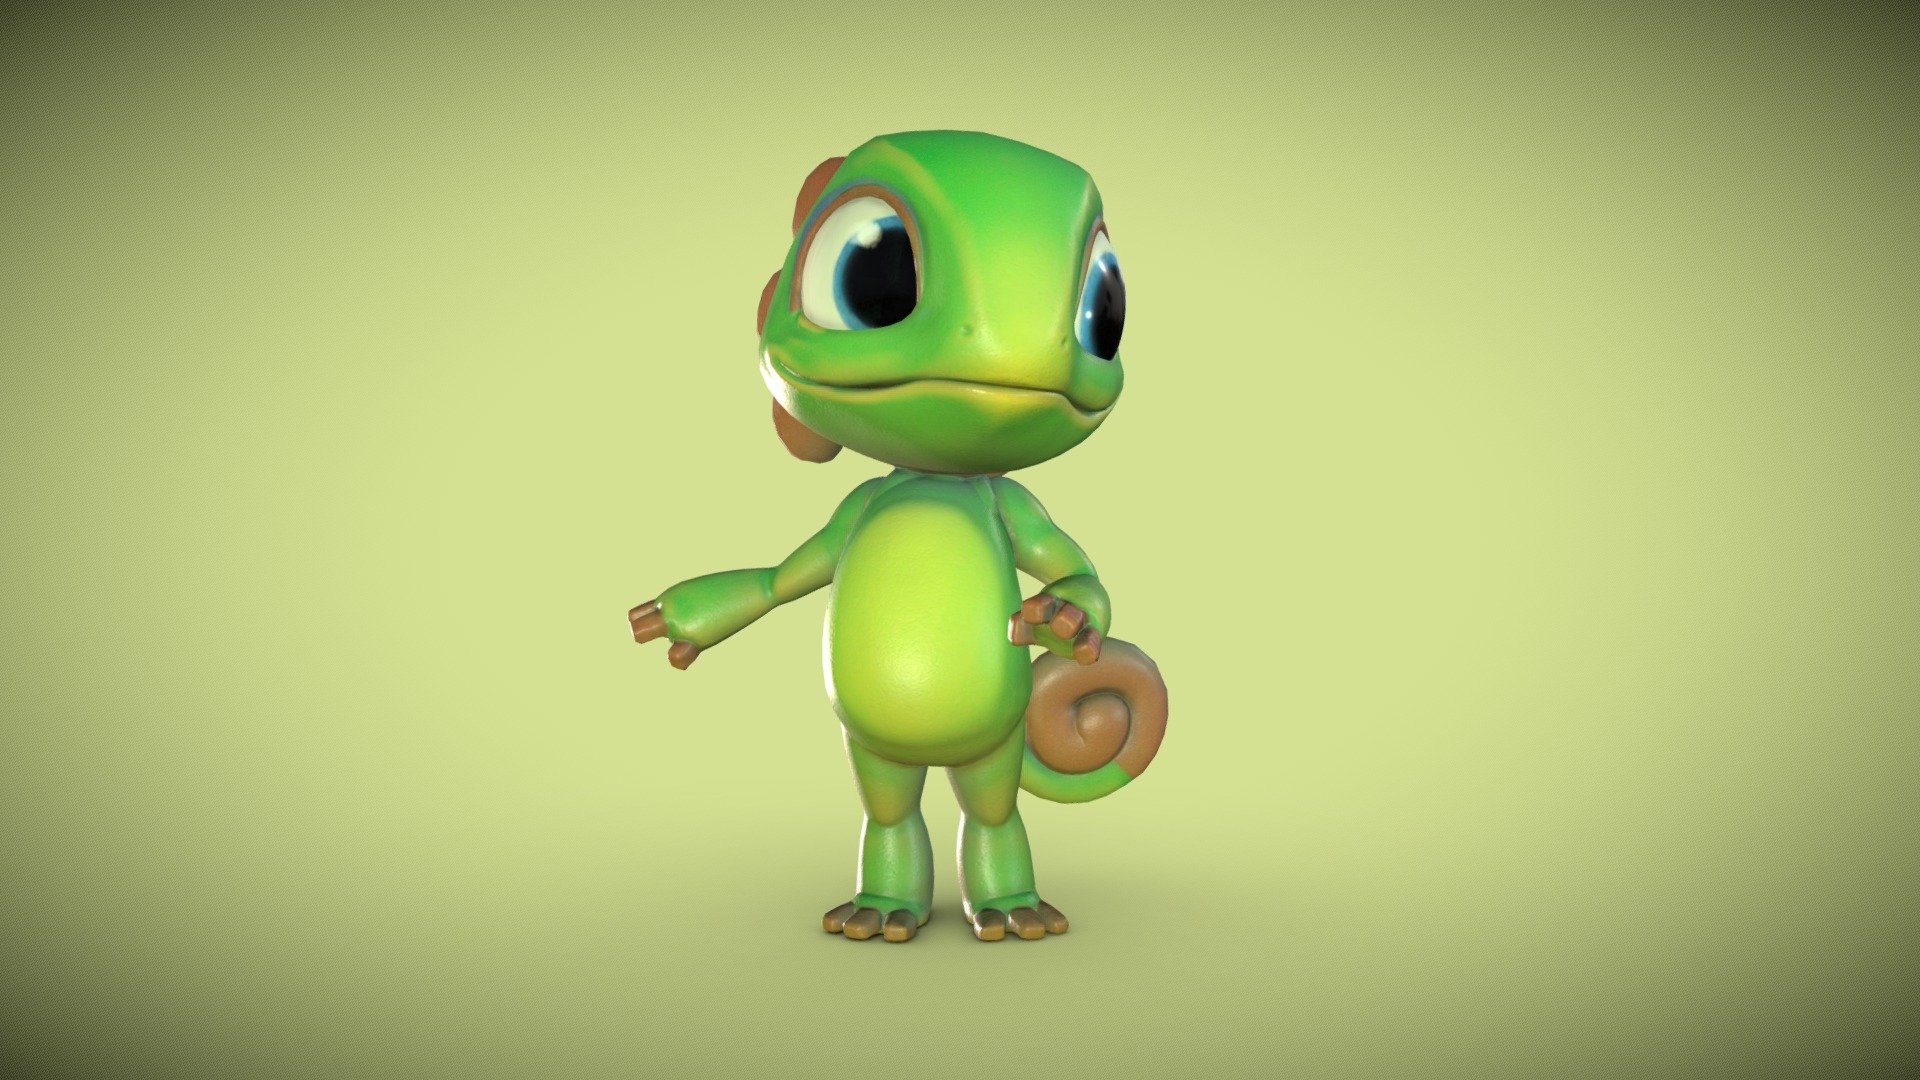 Yooka from Yooka-Laylee cutified!

Sculpted in ZBrush, retopologized in Maya, textured in Substance Painter.

Feel free to download and use for any non-commercial work.

Original fanart (c) Nicholas Kole, Yooka-Laylee (c) Playtonic 3d model